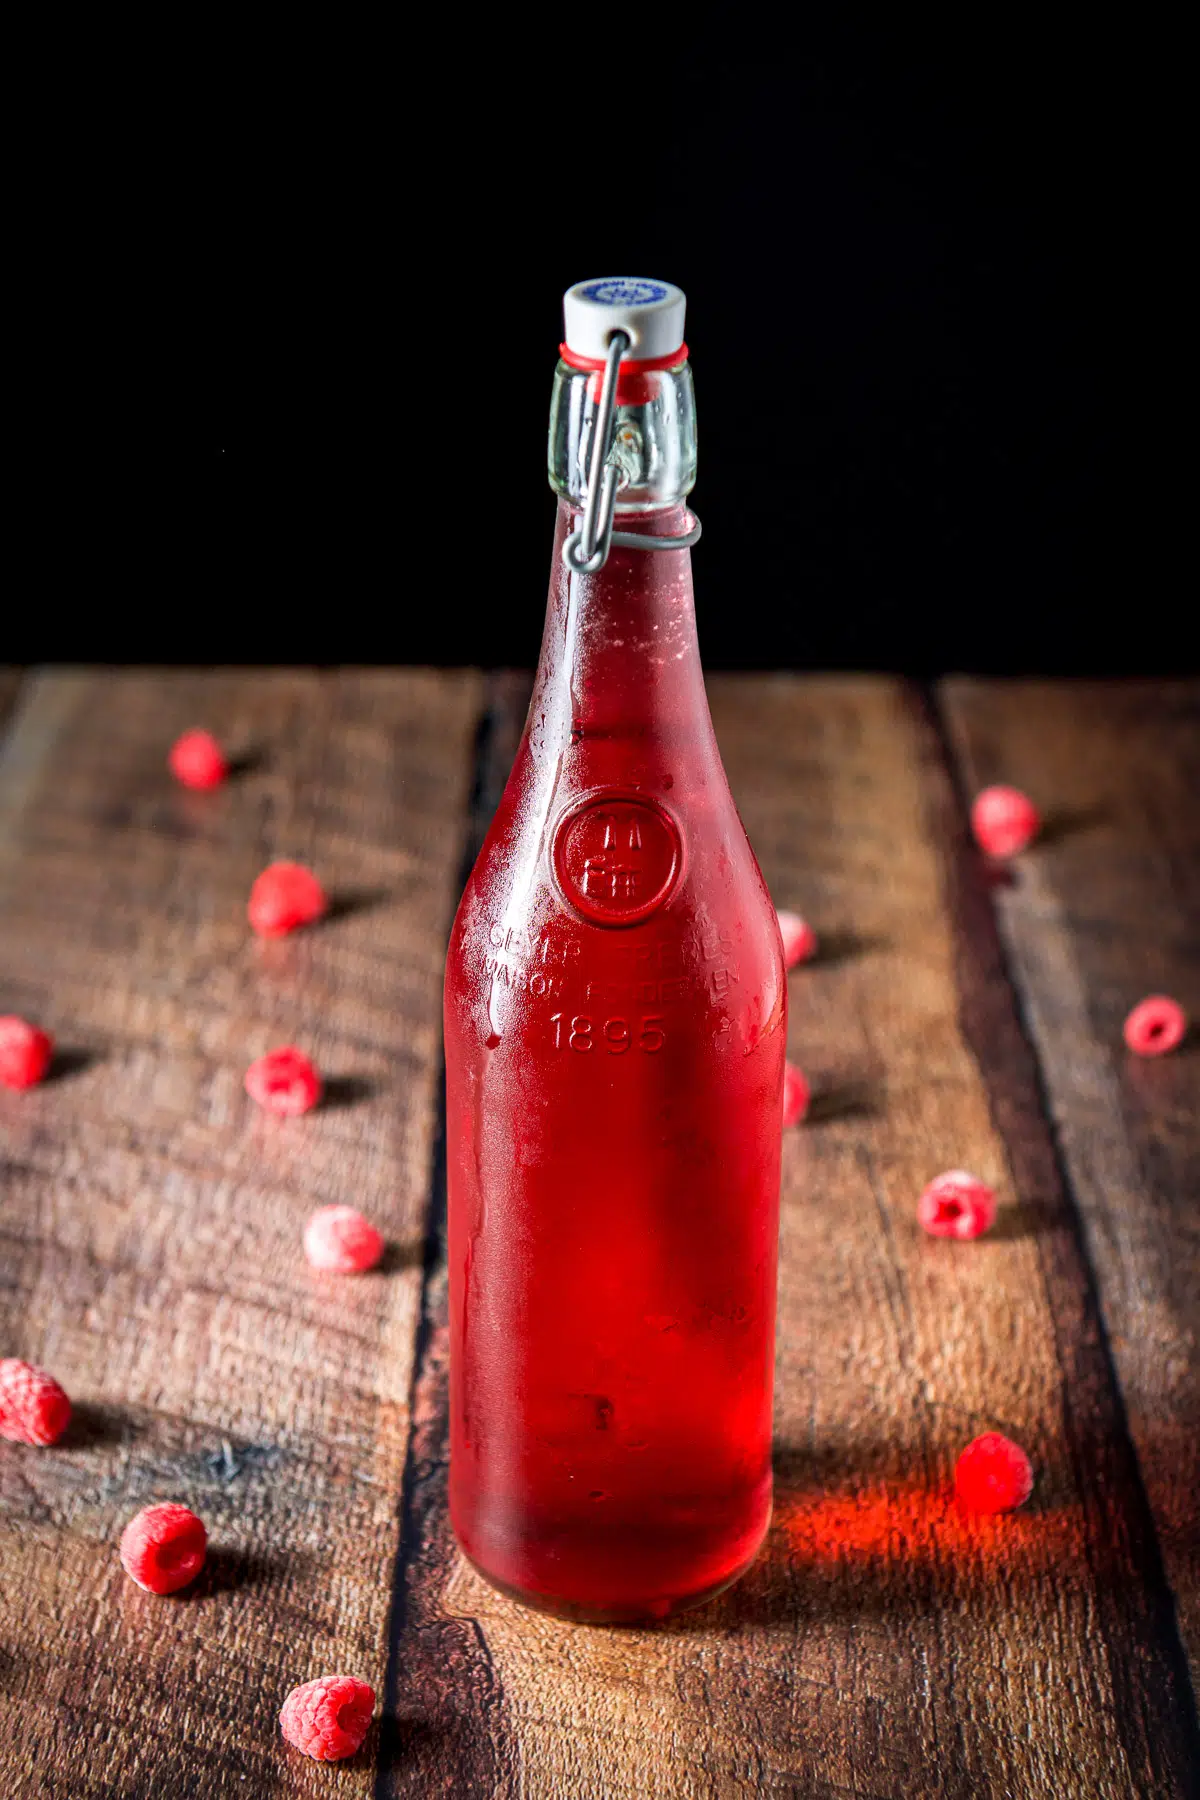 Raspberries on a table with the bottle of red vodka